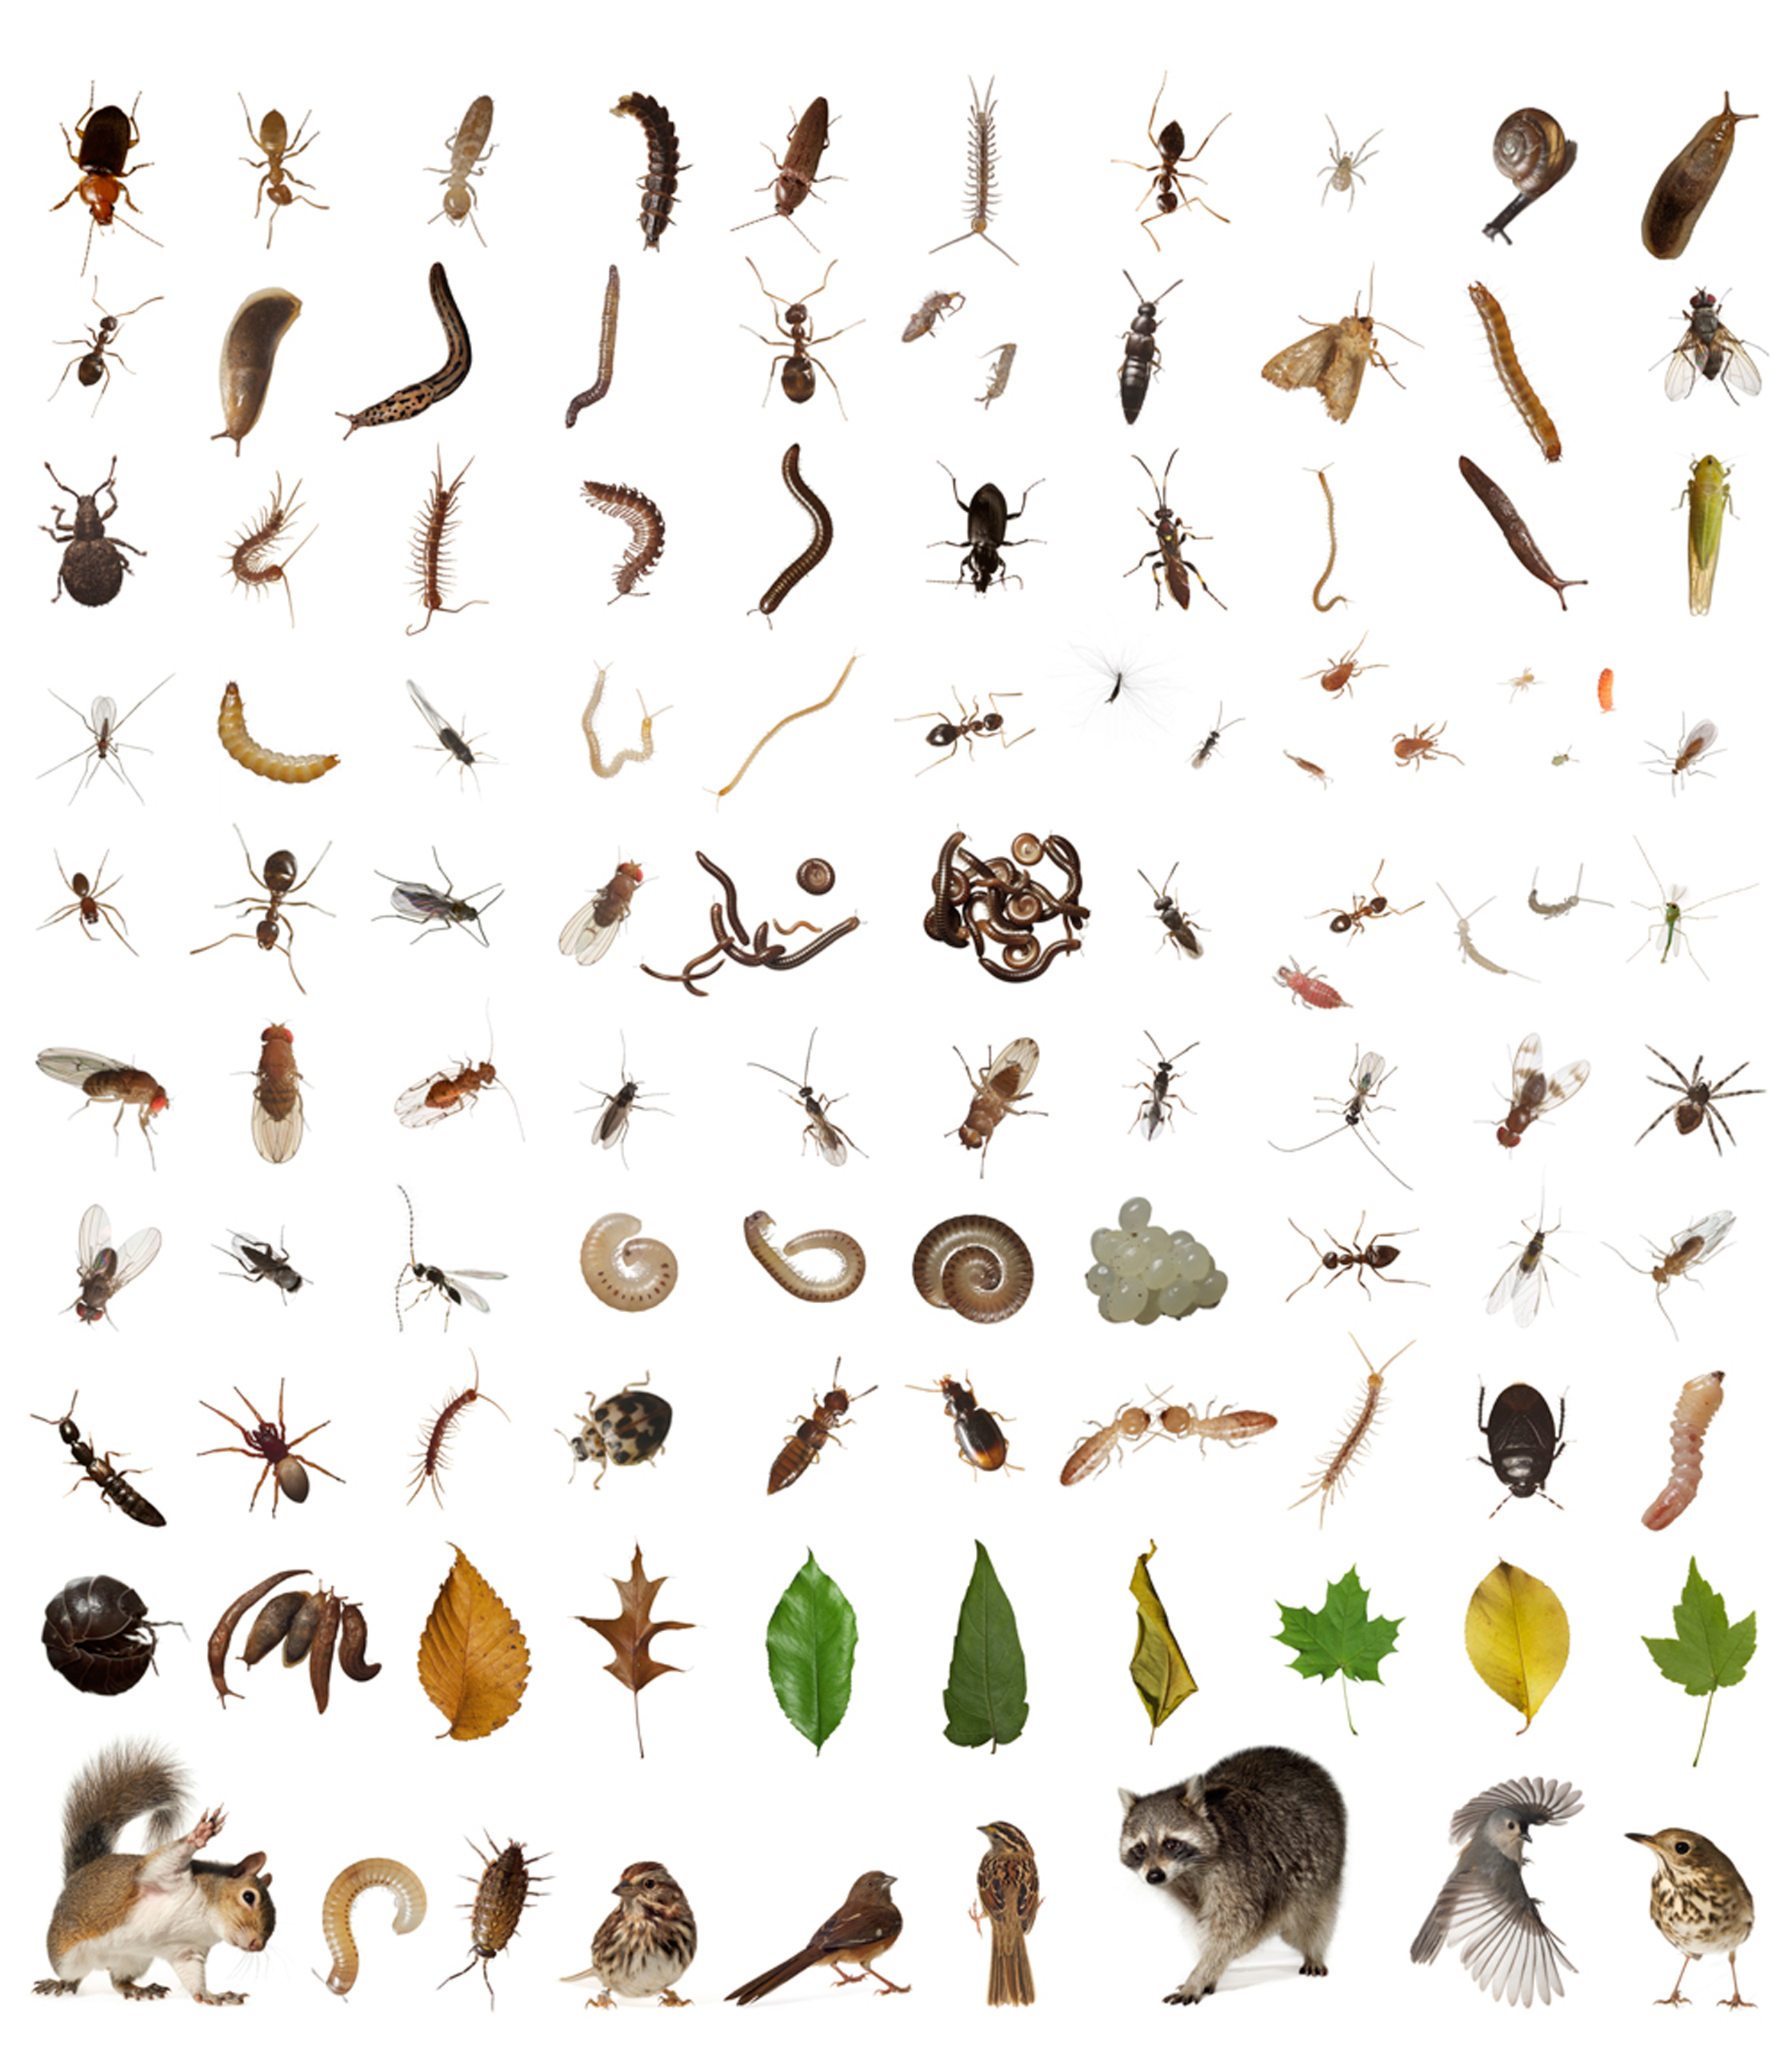 A selection of creatures revealed through inventorying one cubic foot from Hallett Nature Sanctuary in Central Park, New York City.